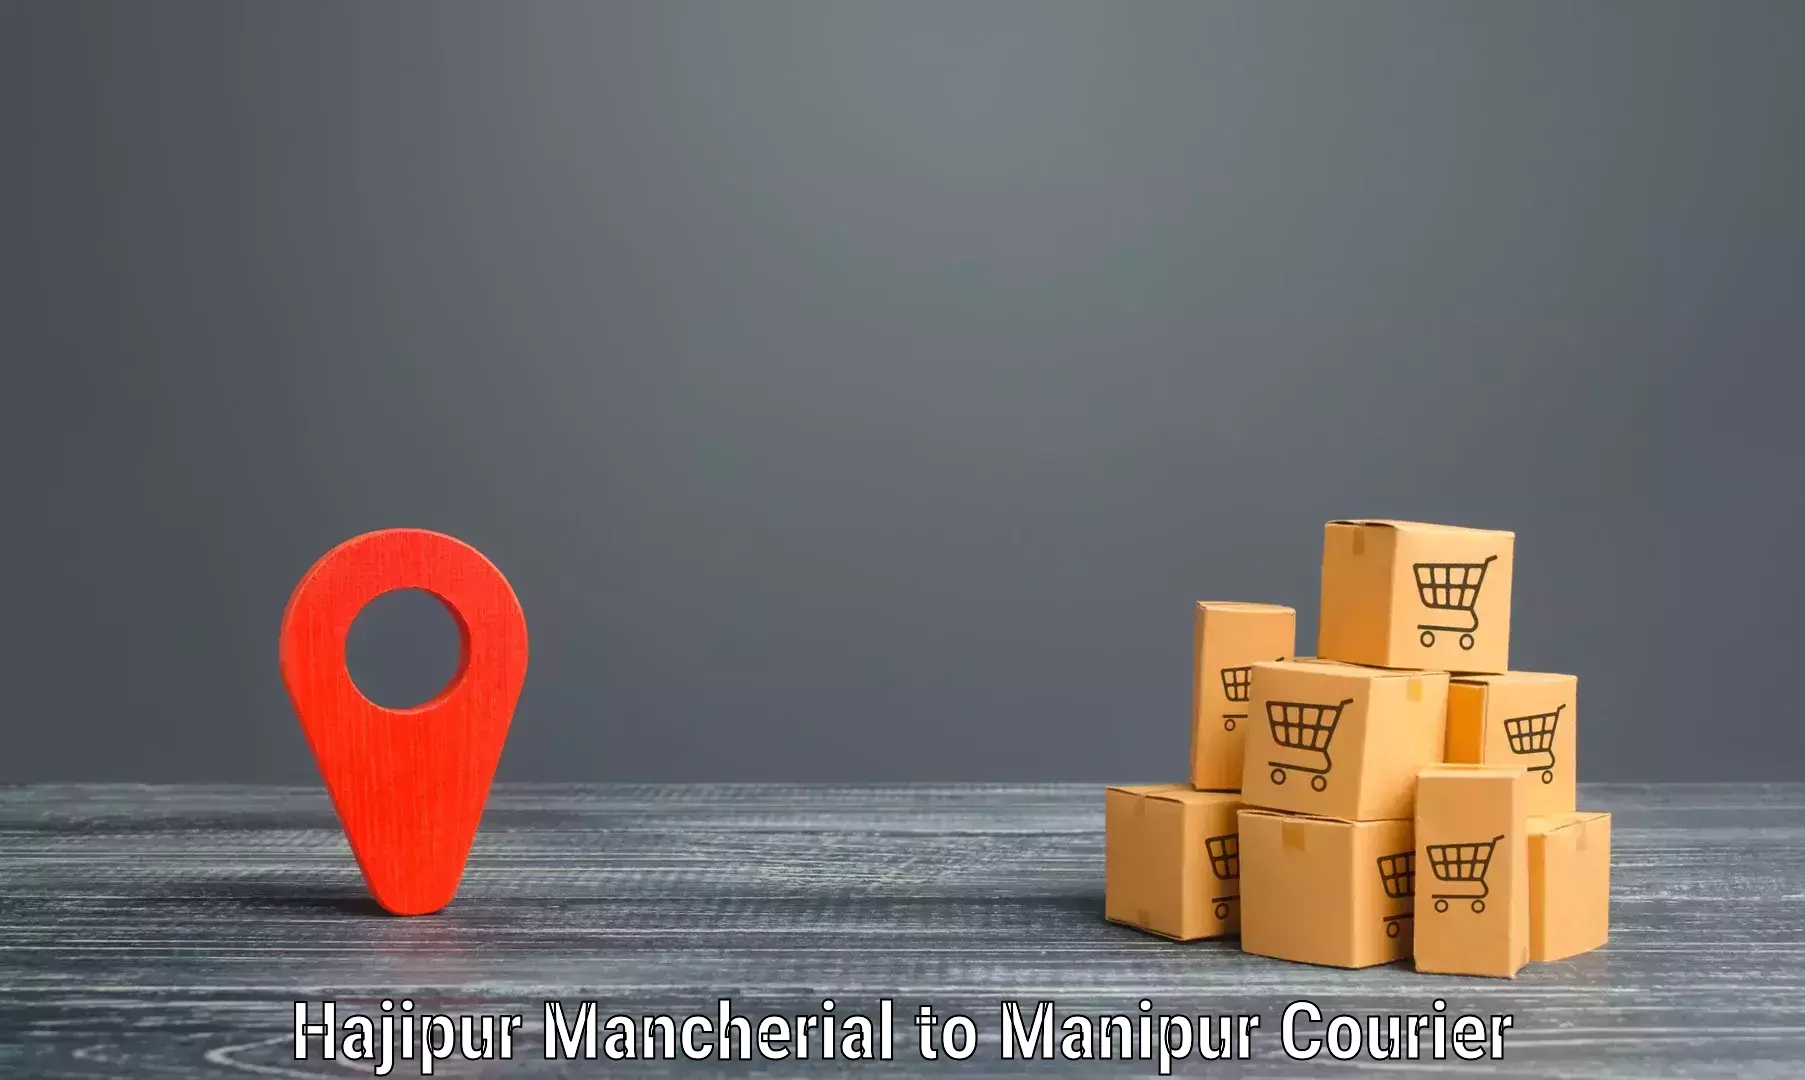 Multi-service courier options Hajipur Mancherial to Ukhrul